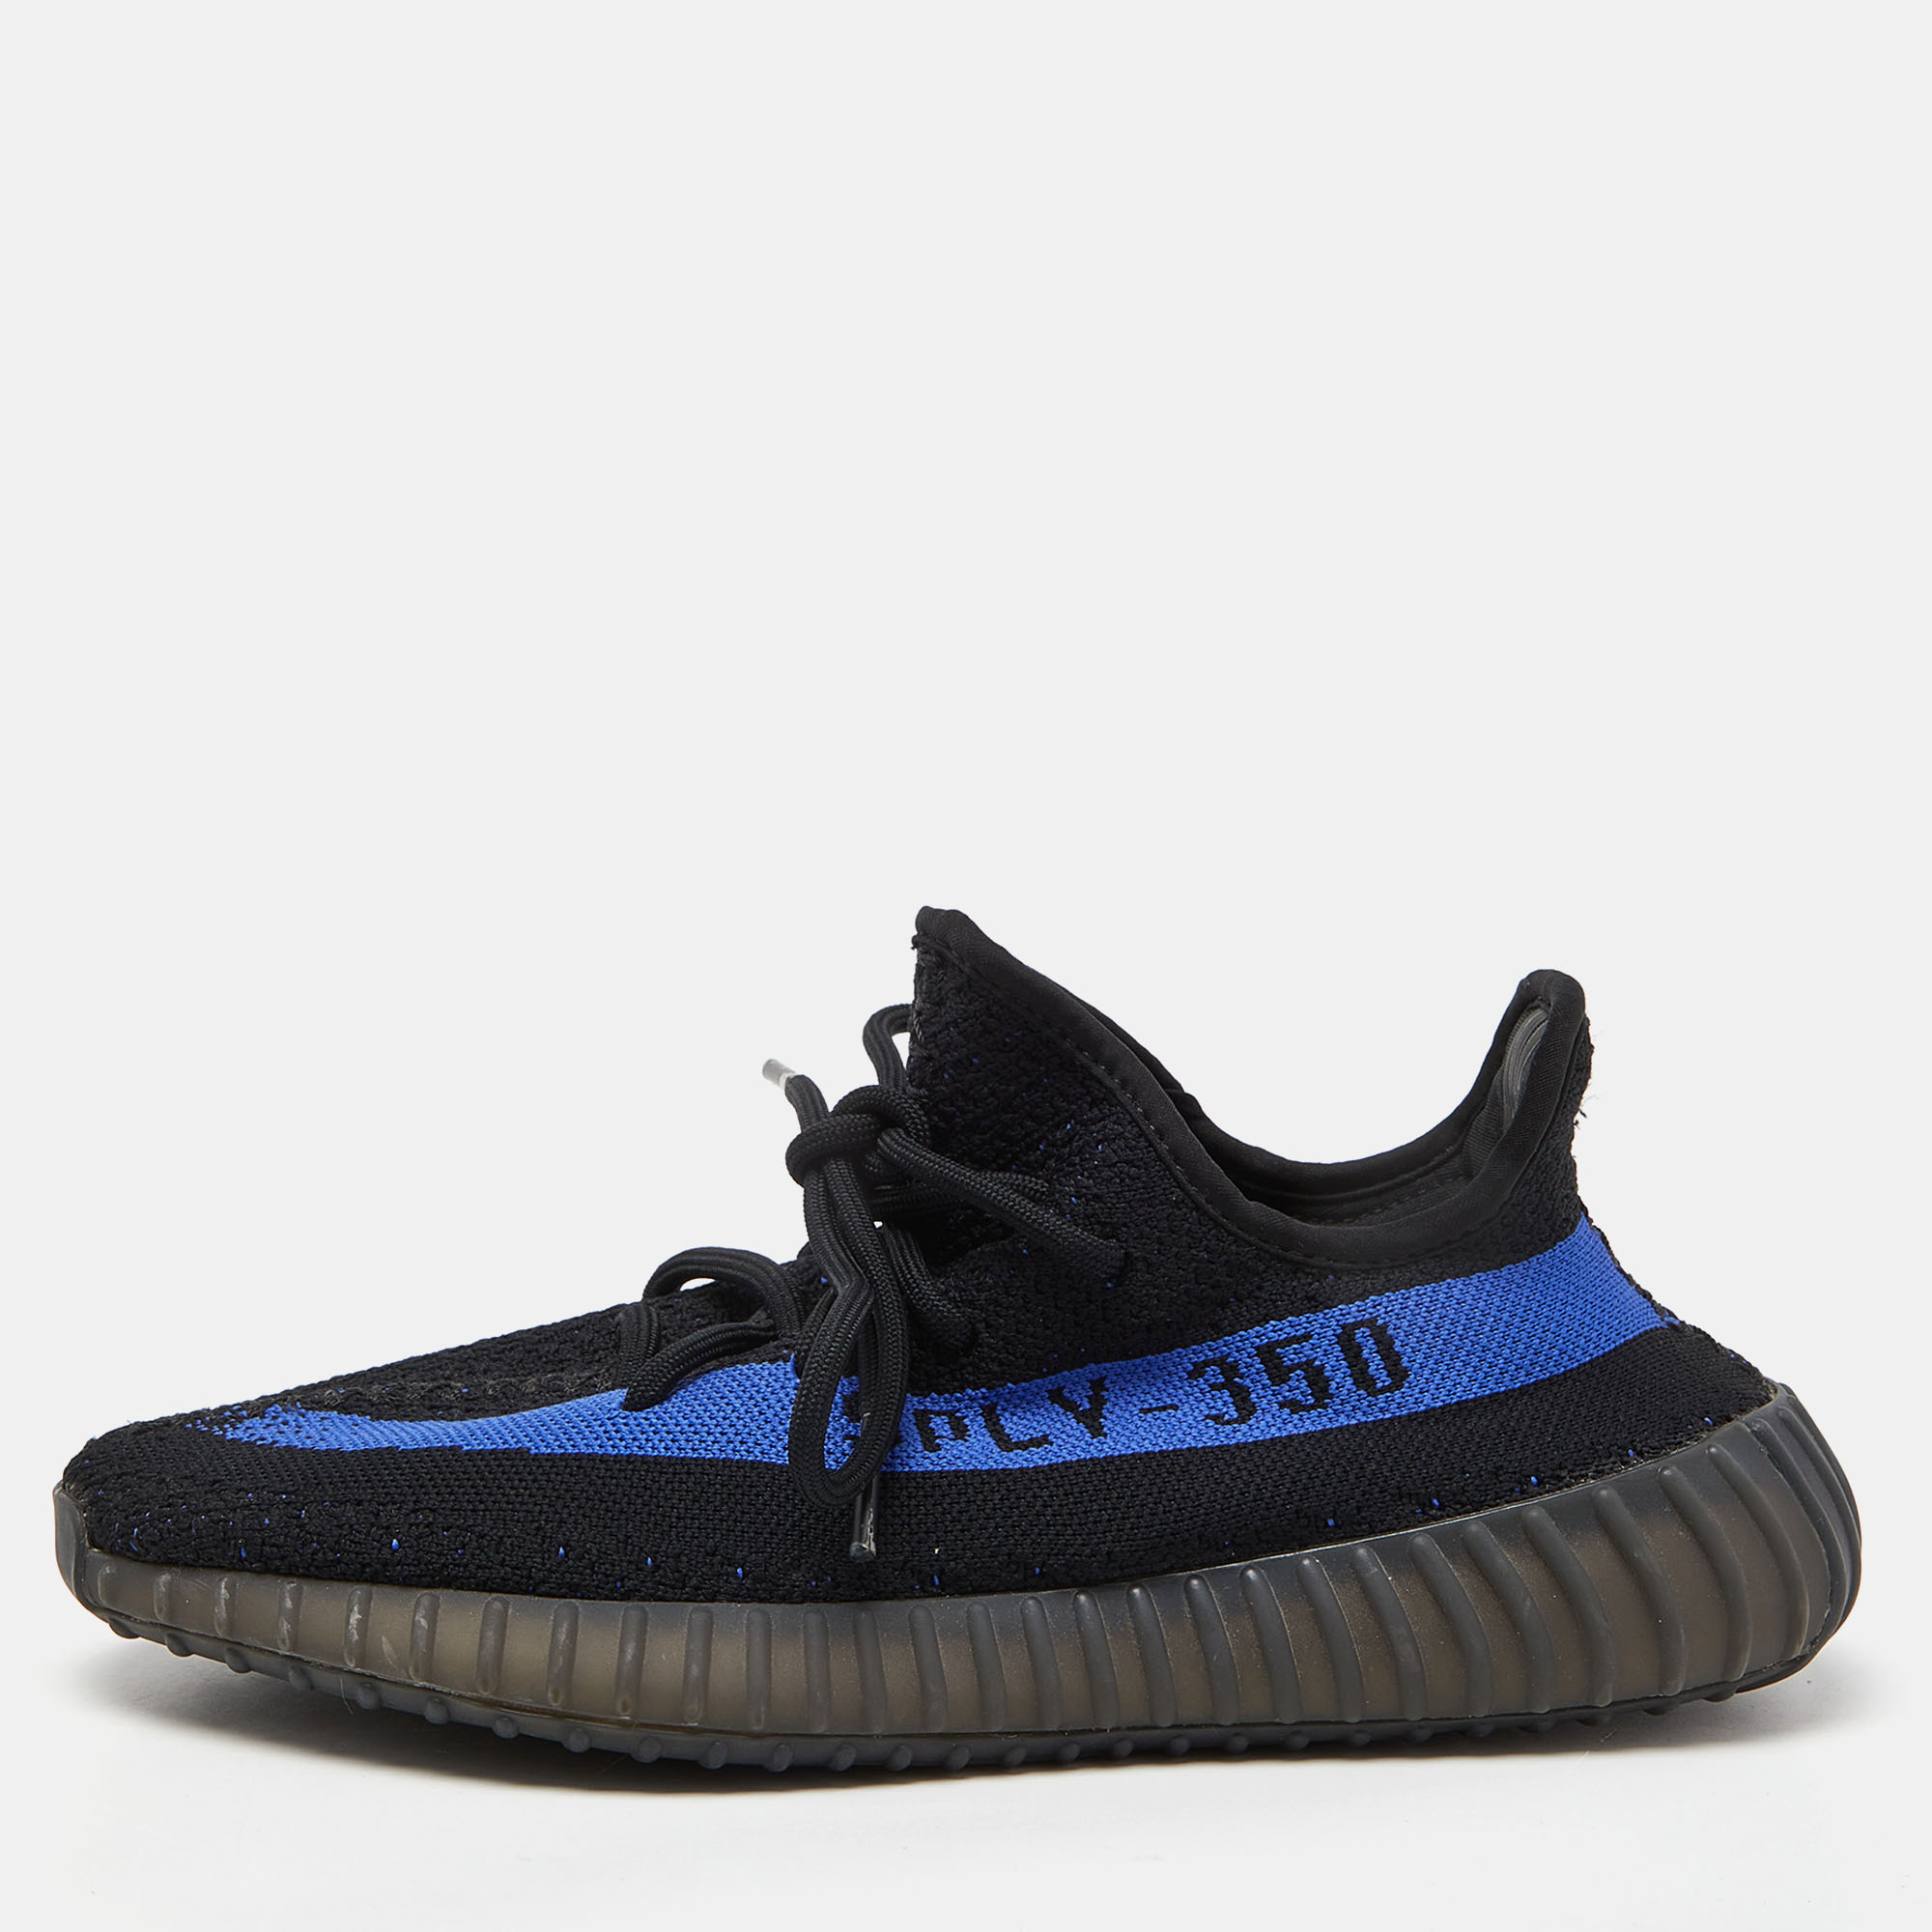 

Yeezy x Adidas Black/Blue Knit Fabric Boost 350 V2 Dazzling Blue Sneakers Size 40 1/3